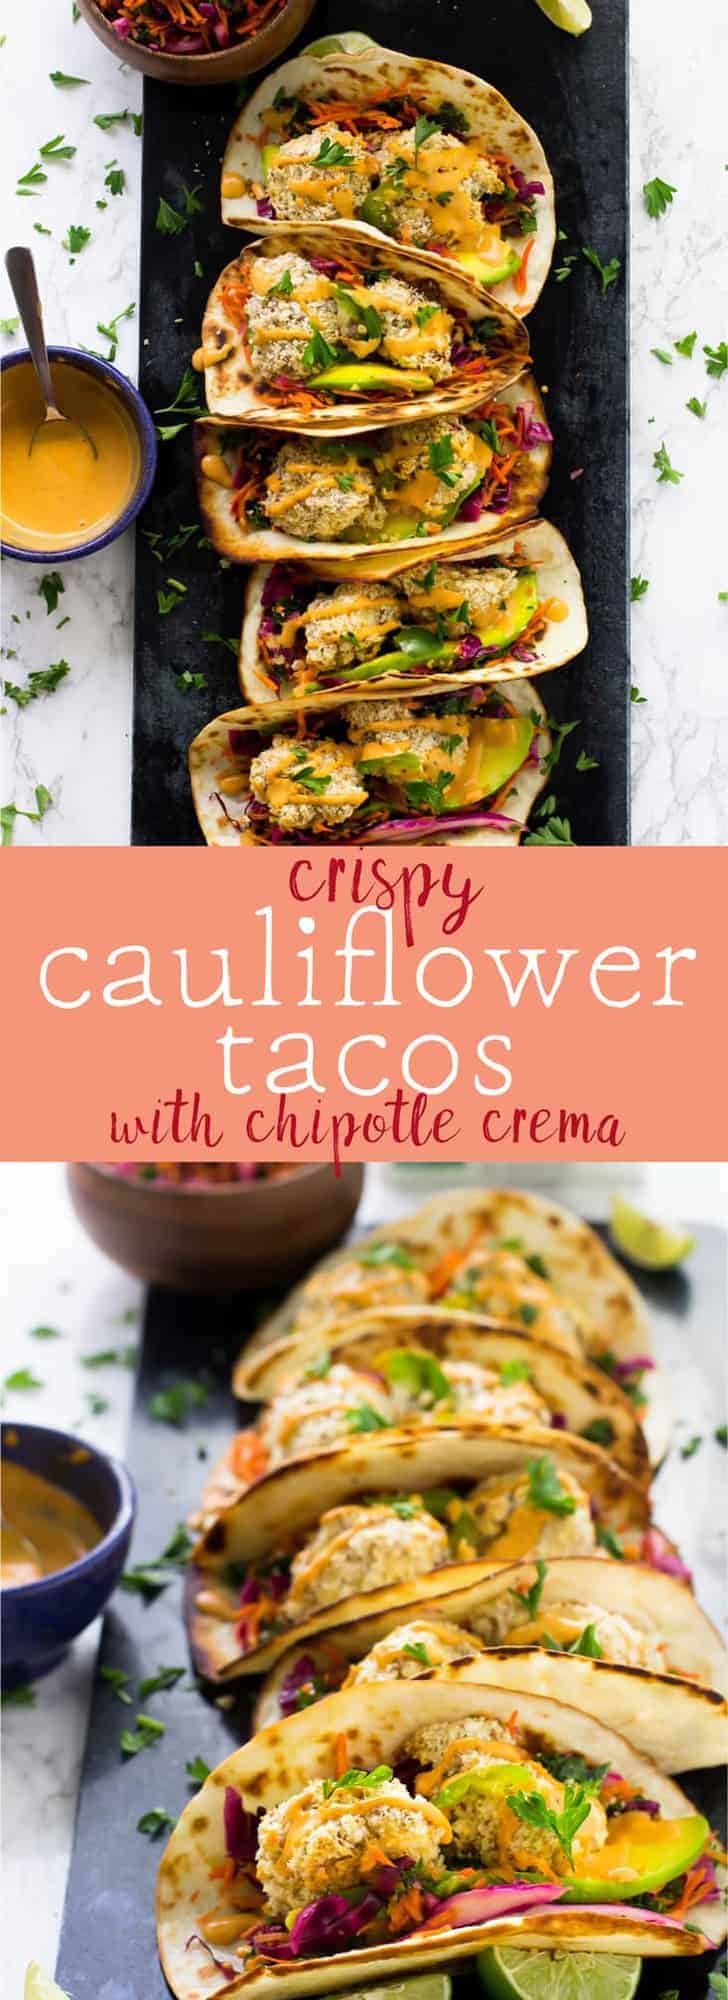 These Crispy Cauliflower Tacos with Chipotle Crema are packed with so much flavour! They are served with a kale cabbage slaw for an irresistible taco dish! via https://jessicainthekitchen.com